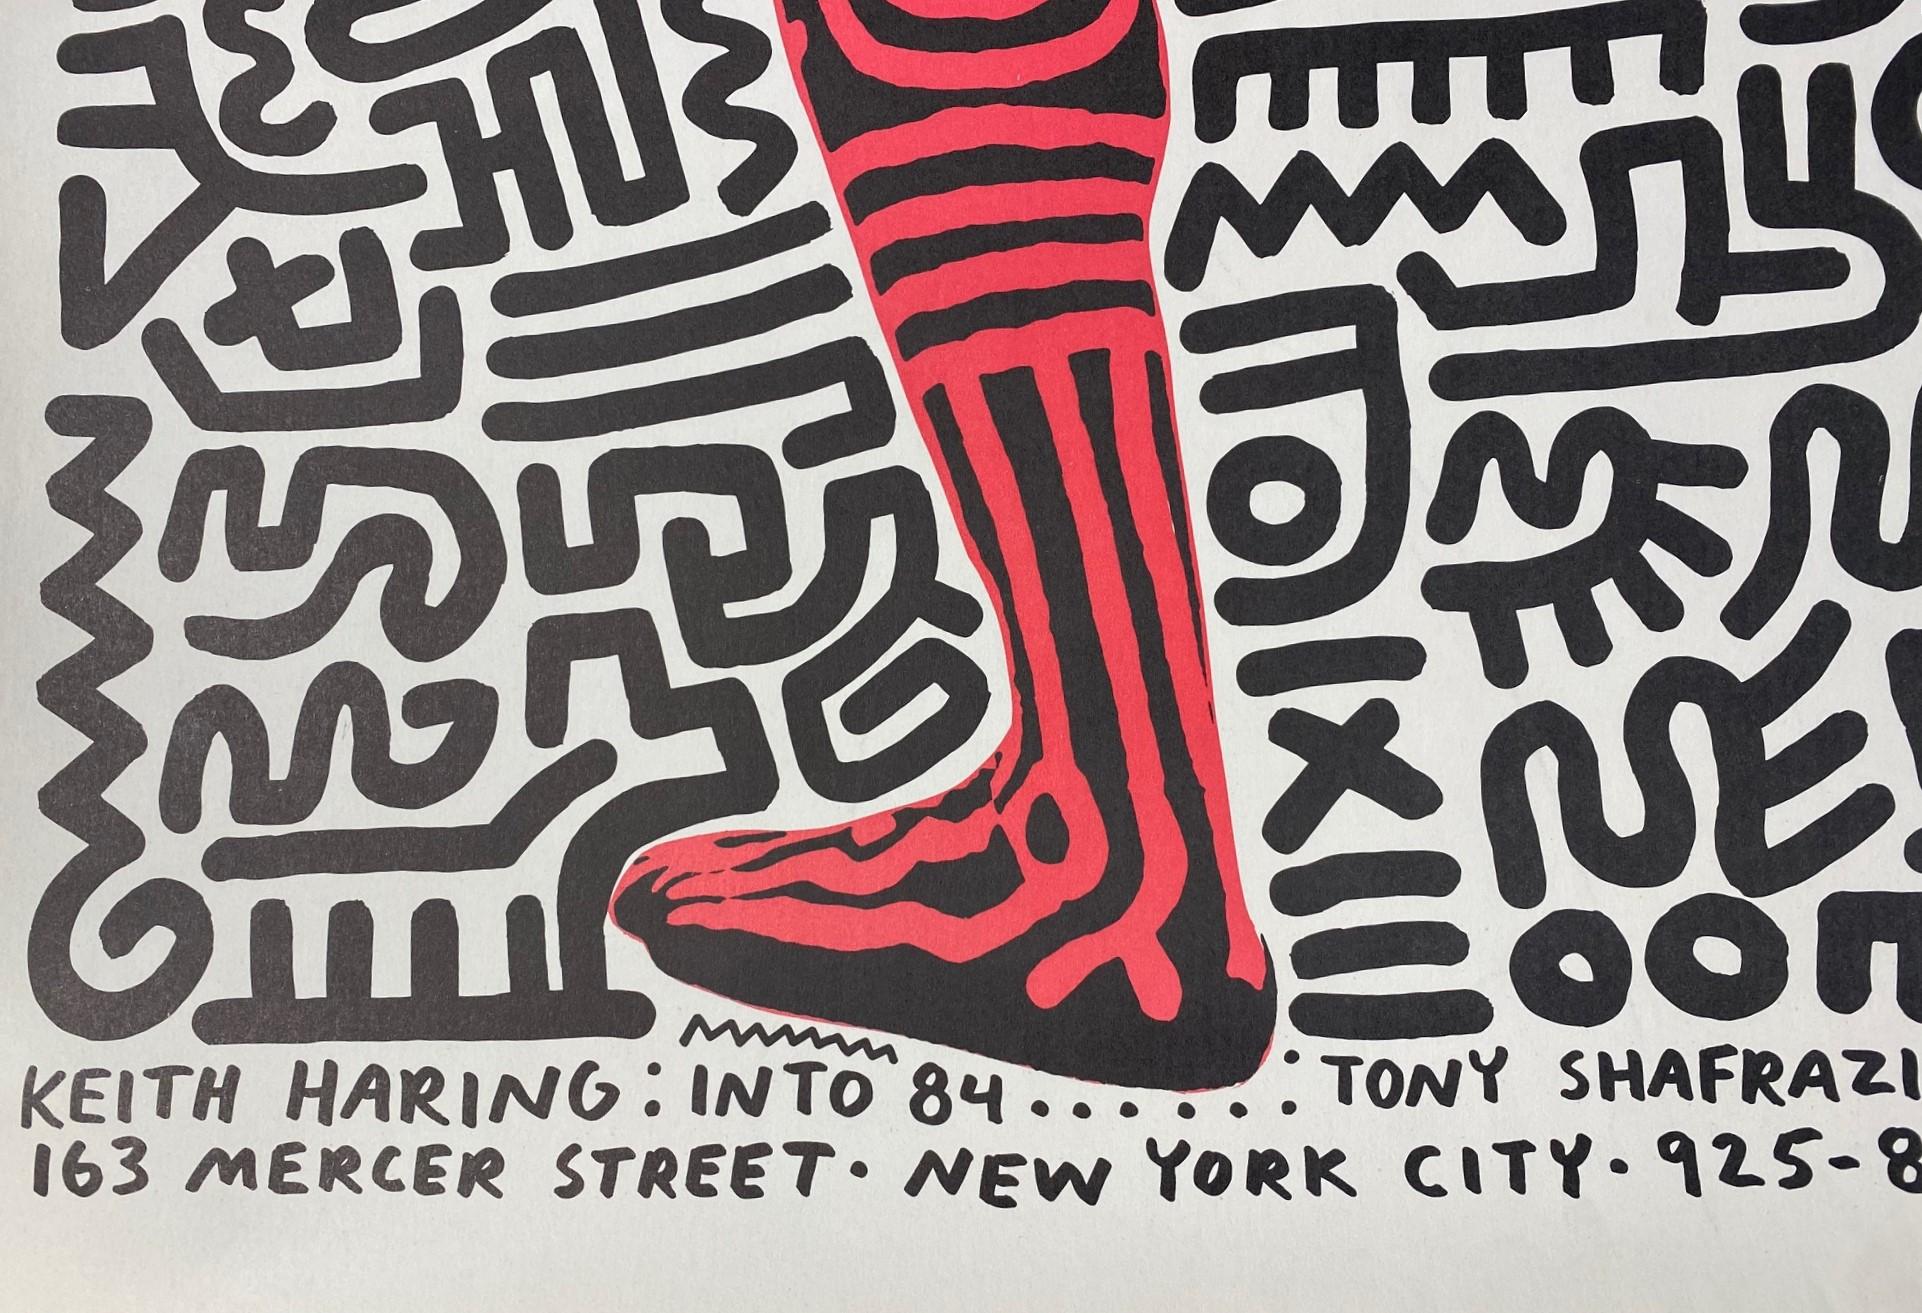 Keith Haring Lithographie signée Tony Shafrazi Gallery Exhibition Poster Into 84 en vente 1